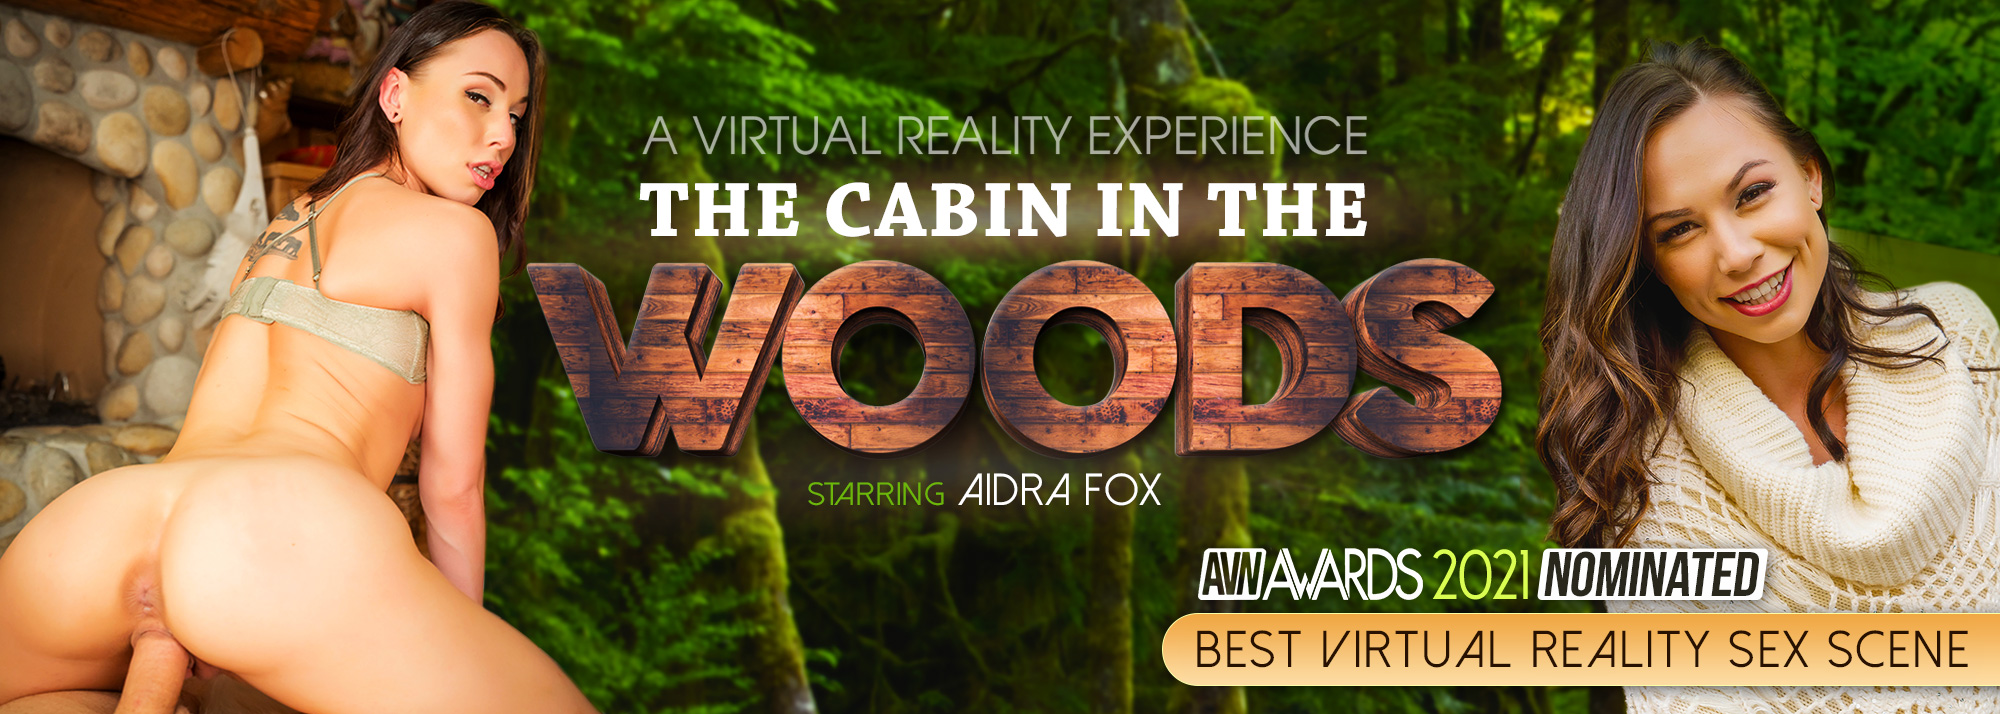 The Cabin in the Woods - VR Porn Video, Starring: Aidra Fox